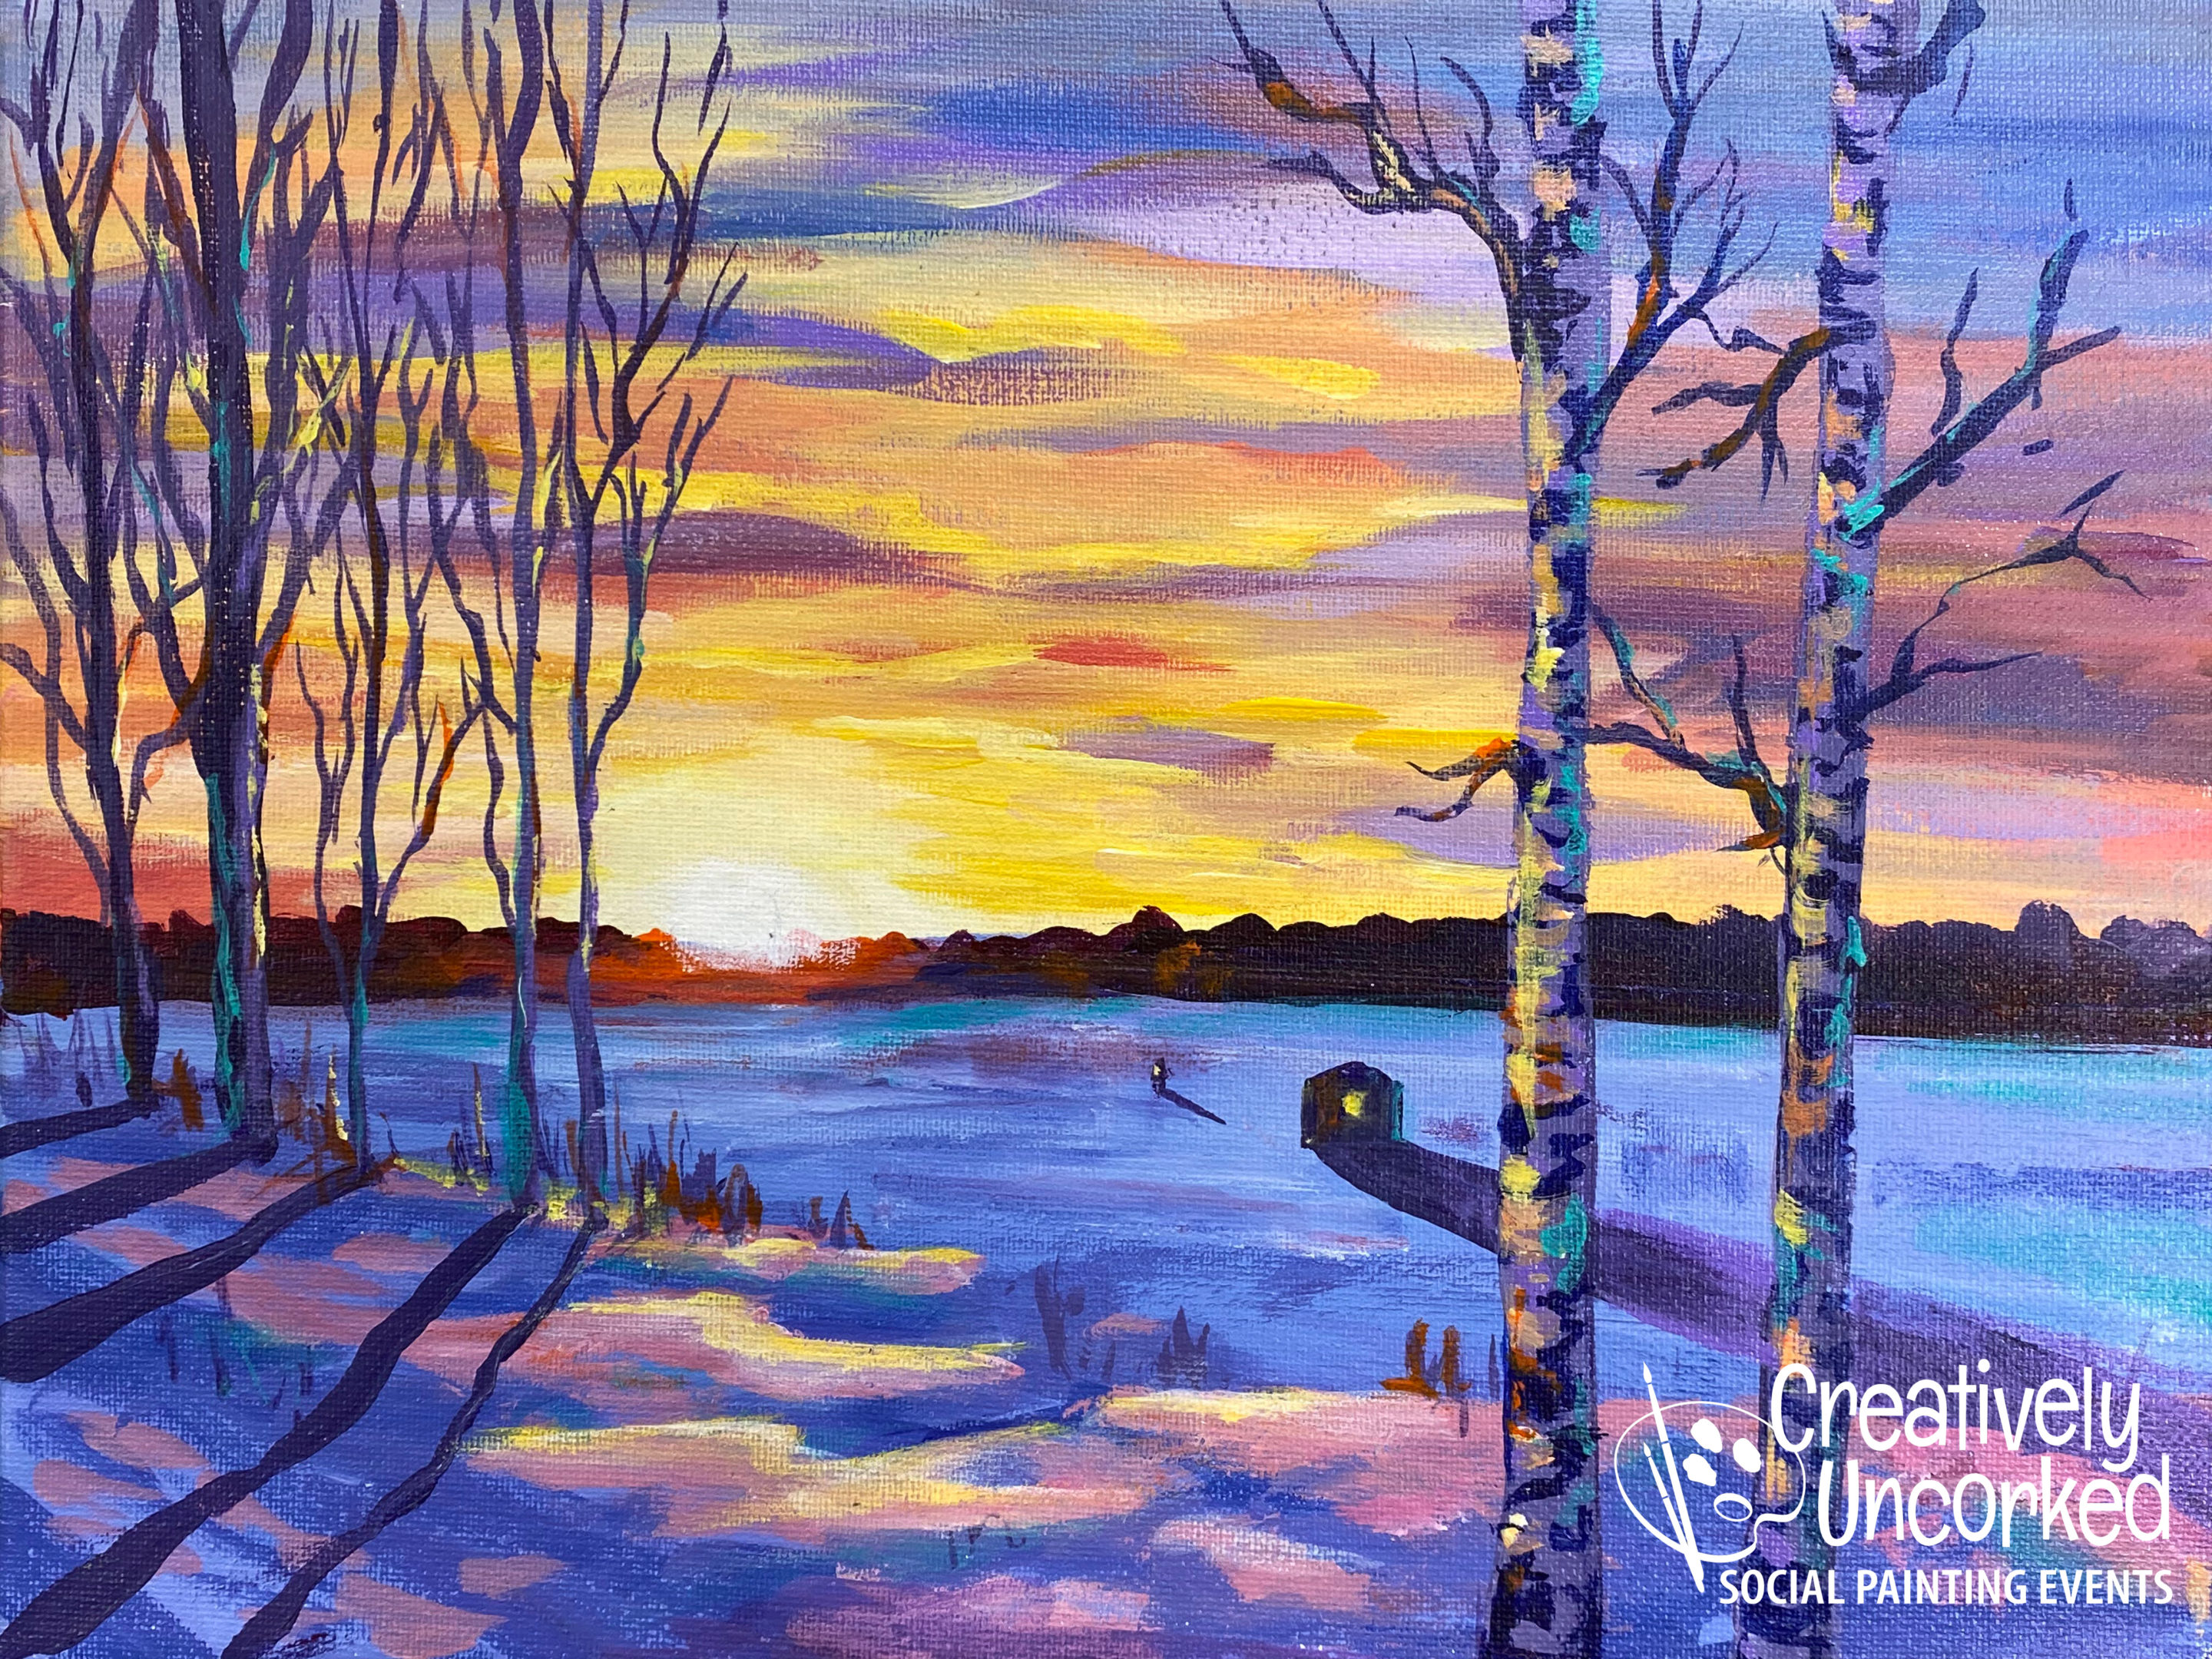 Ice Fishing at Sunrise from Creatively Uncorked http://creativelyuncorked.com/